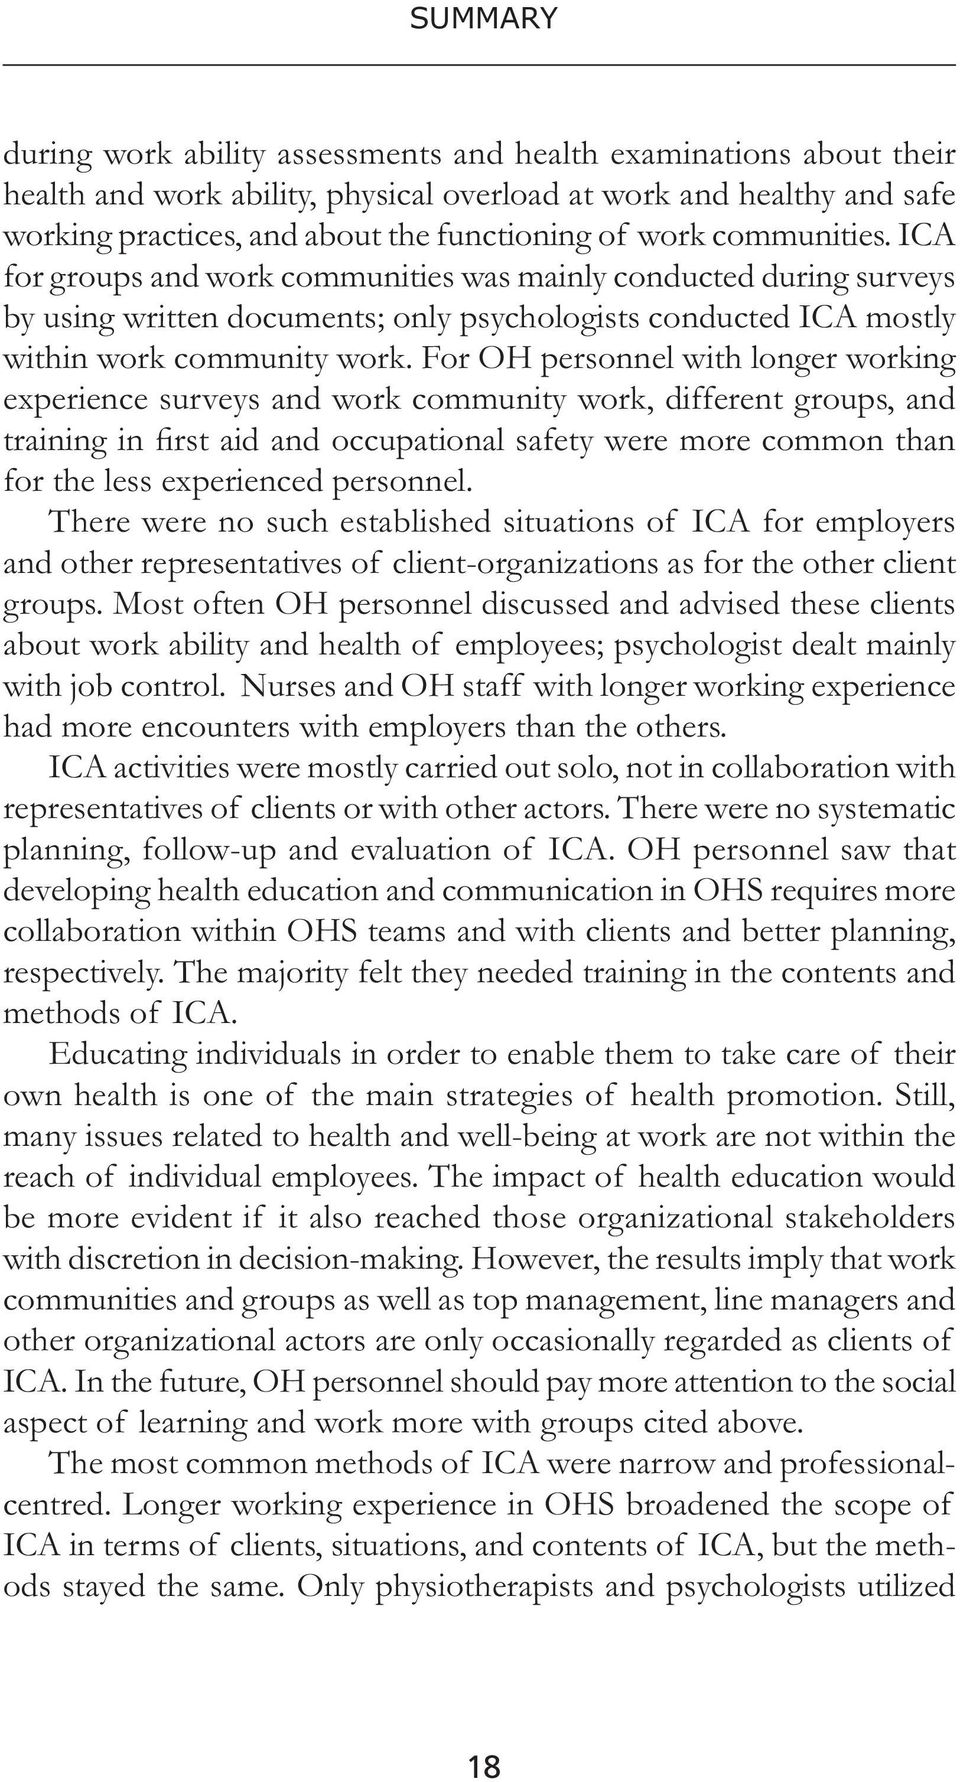 For OH personnel with longer working experience surveys and work community work, different groups, and training in first aid and occupational safety were more common than for the less experienced